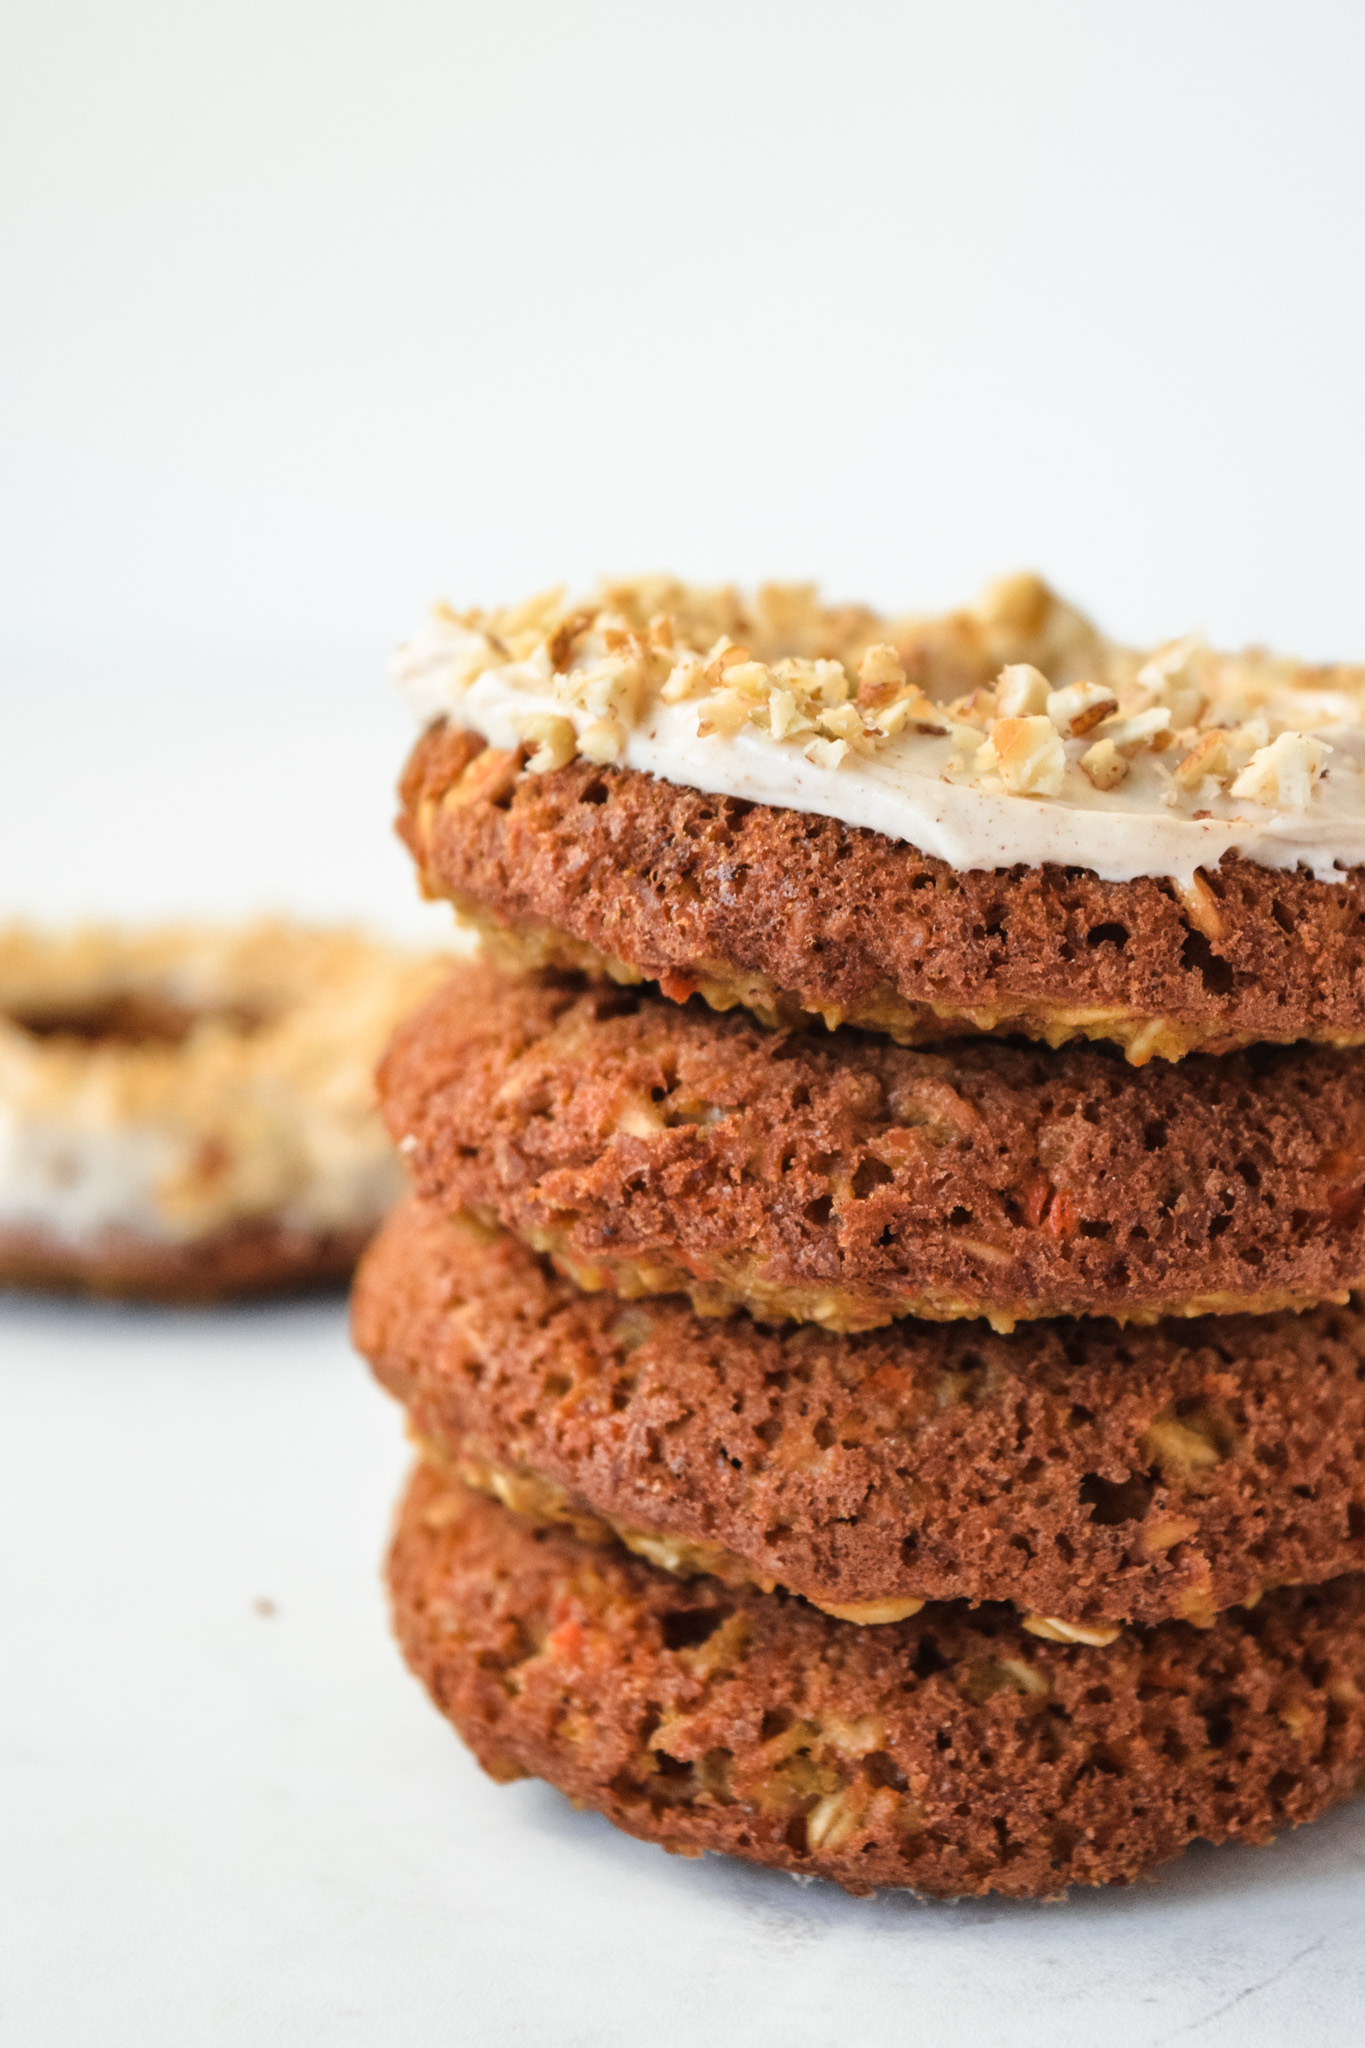 Stack of Gluten Free Carrot Cake Doughnuts with Cream Cheese Frosting